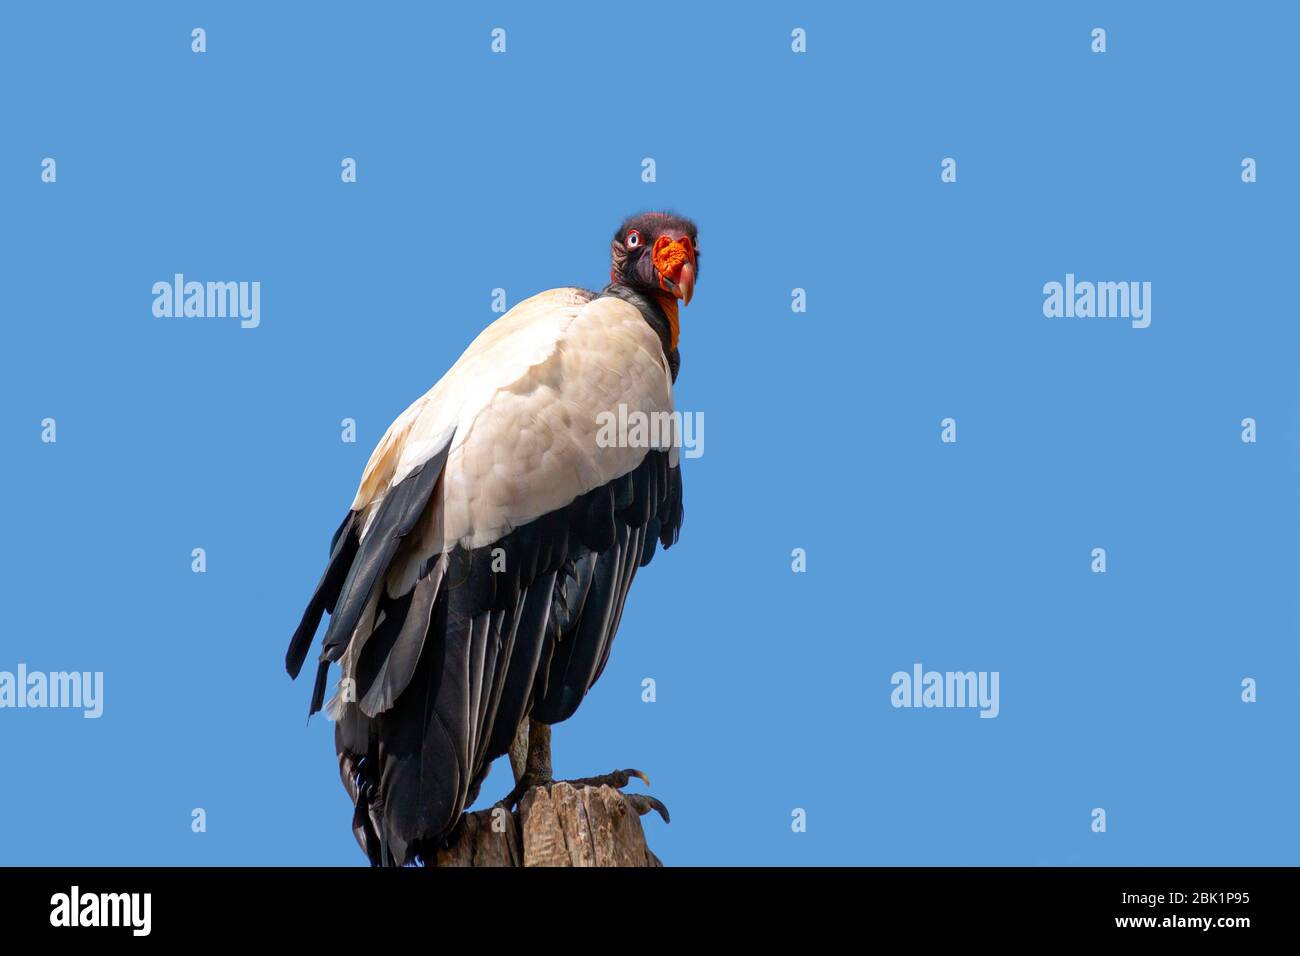 King vulture with scientific name of Sarcoramphus papa perched on a tree  branch against a blue sky Stock Photo - Alamy